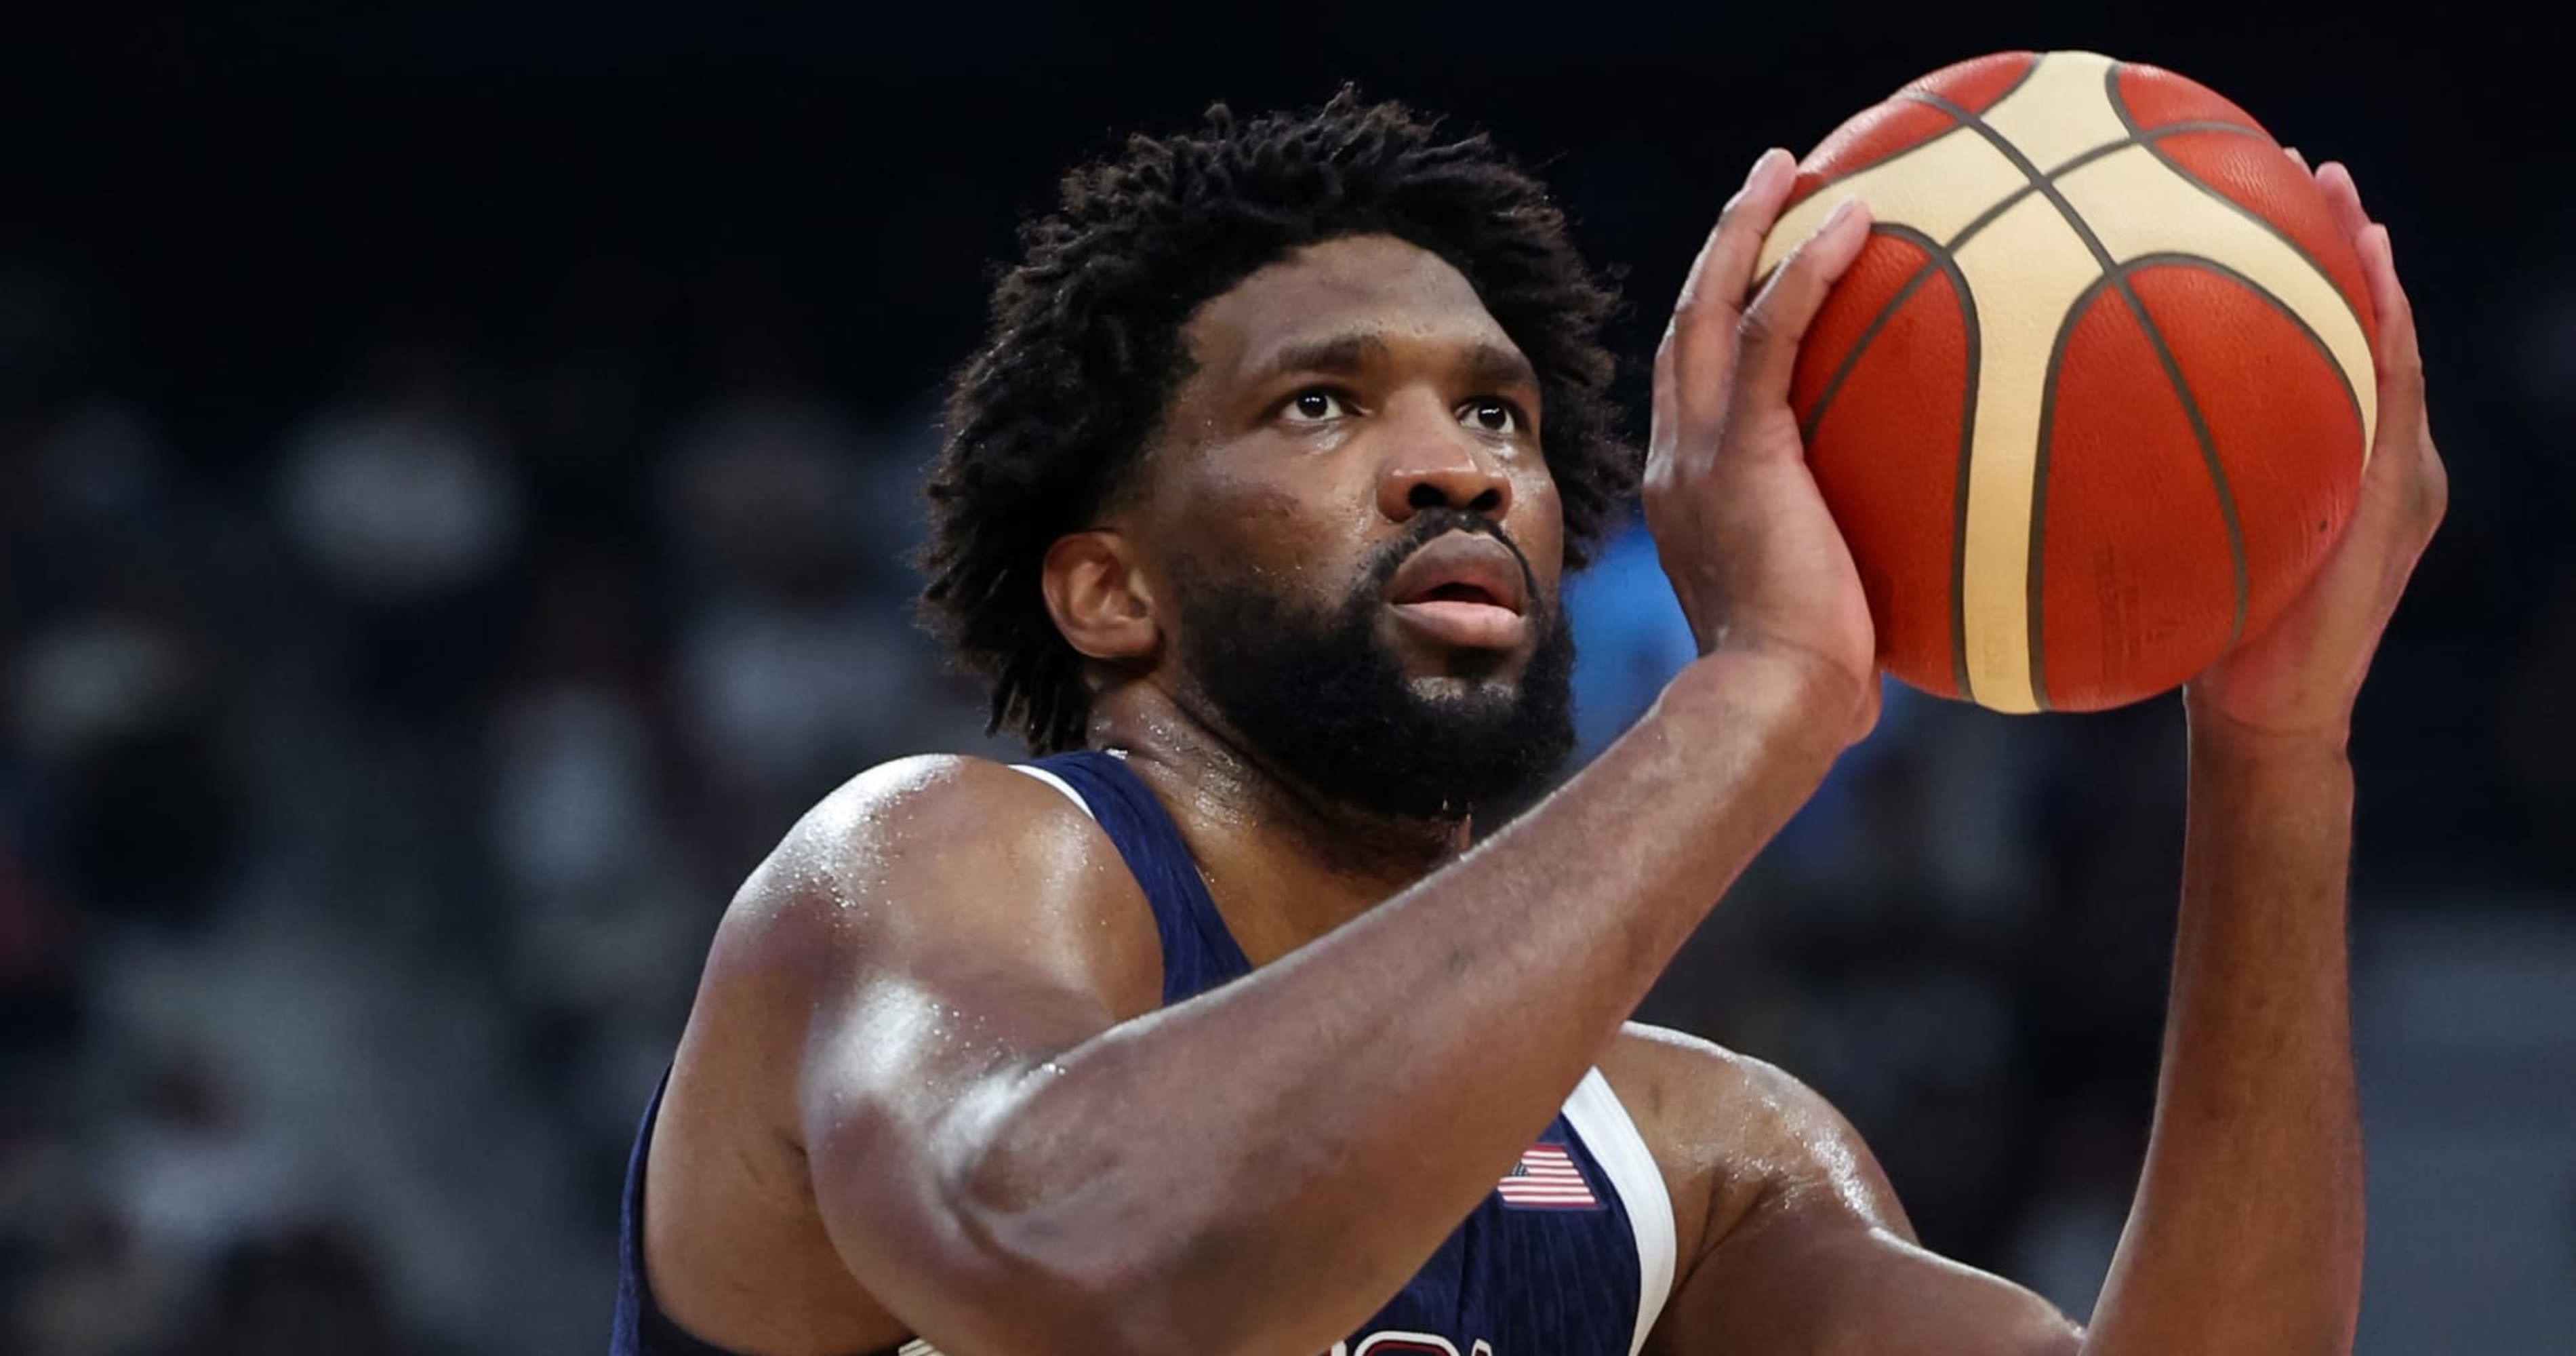 Steve Kerr Discusses Possibility of Team USA Starting AD, Adebayo over Joel Embiid